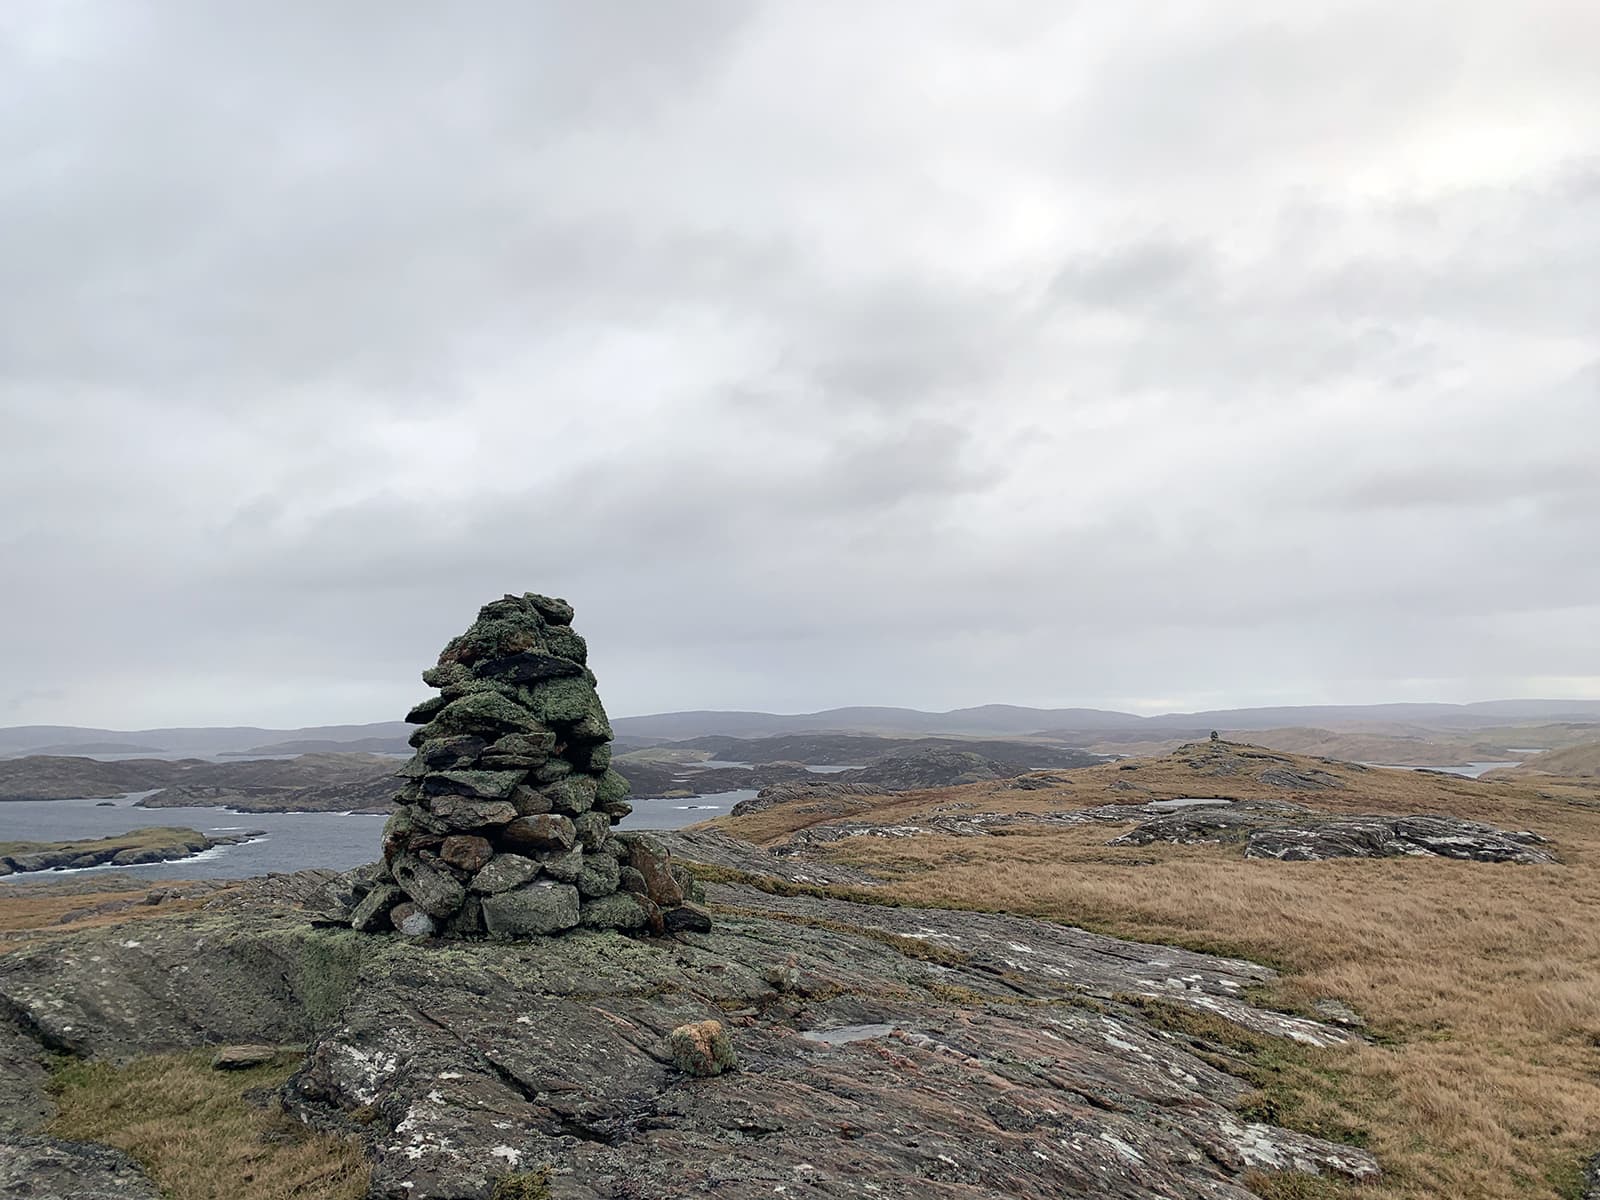 Image with two cairns on hilltops in Shetland.